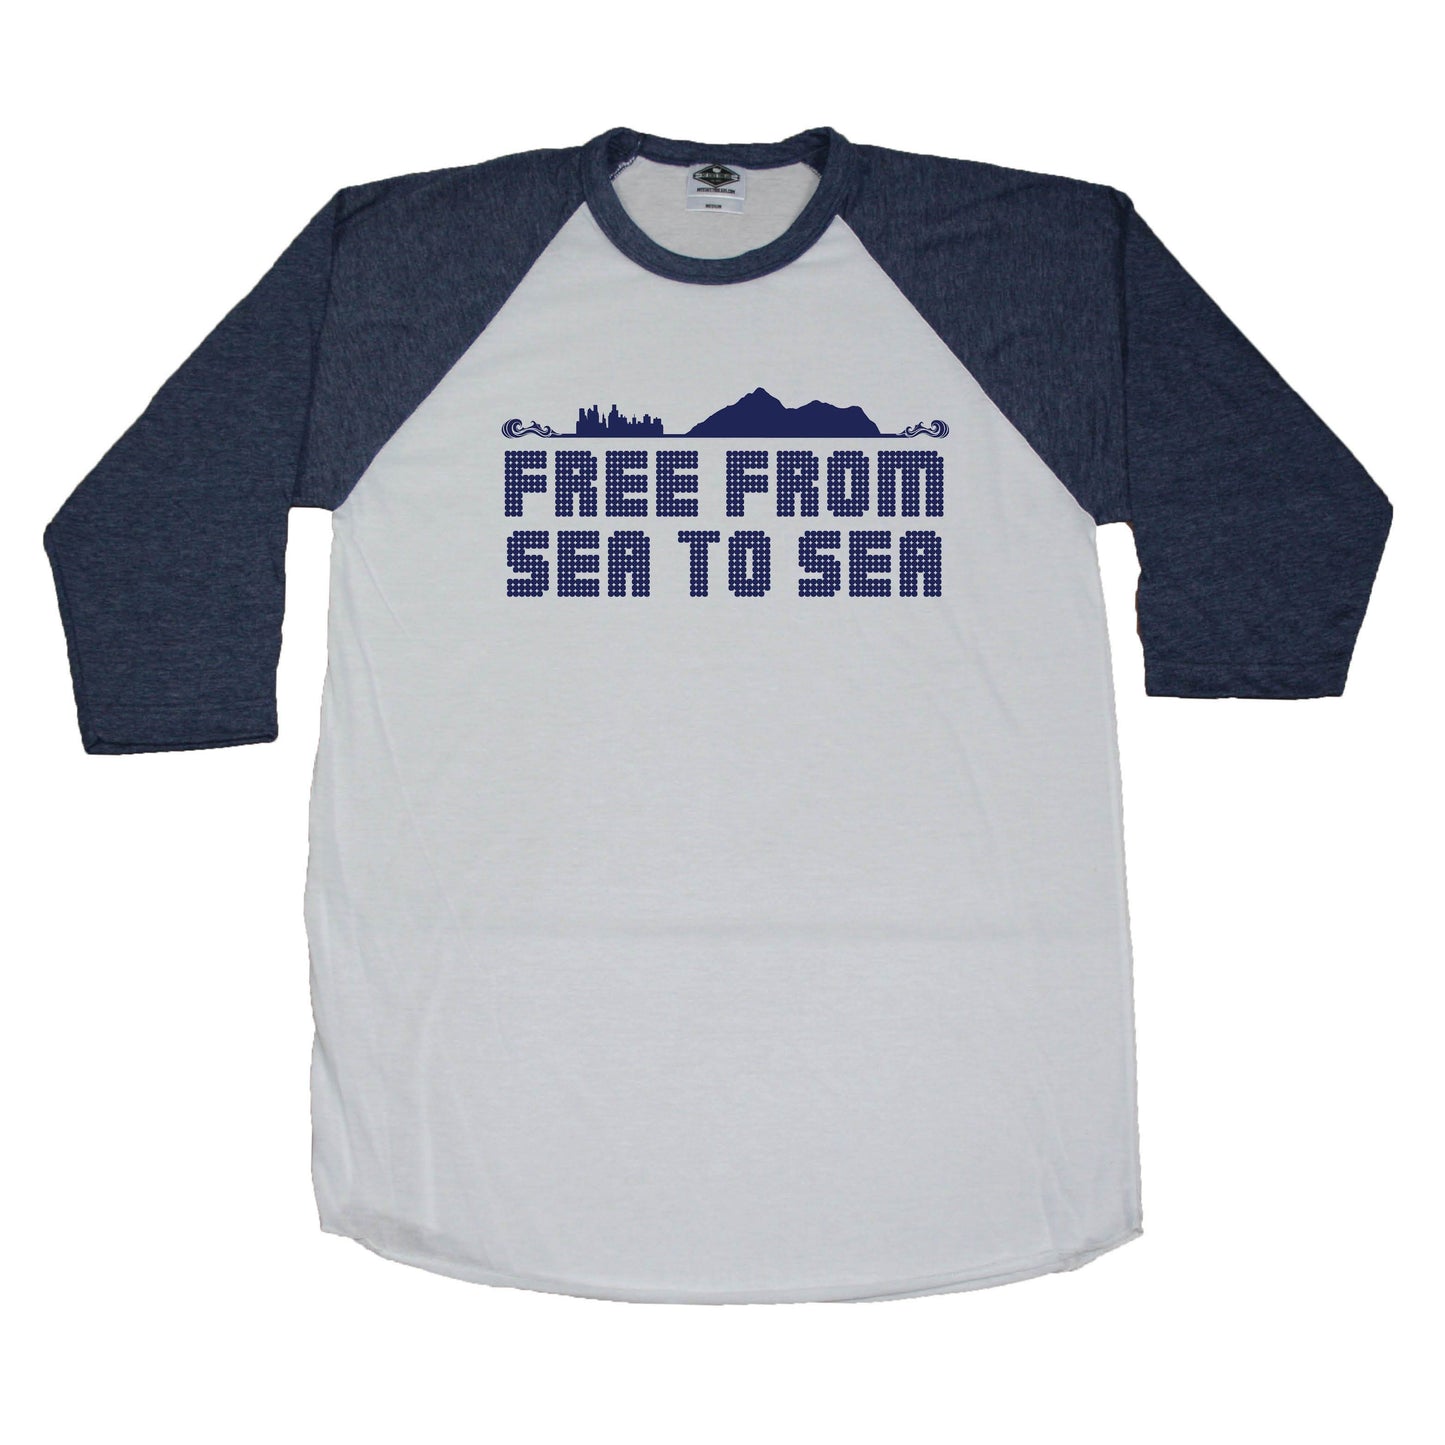 Free From Sea to Sea - 3/4 Sleeve